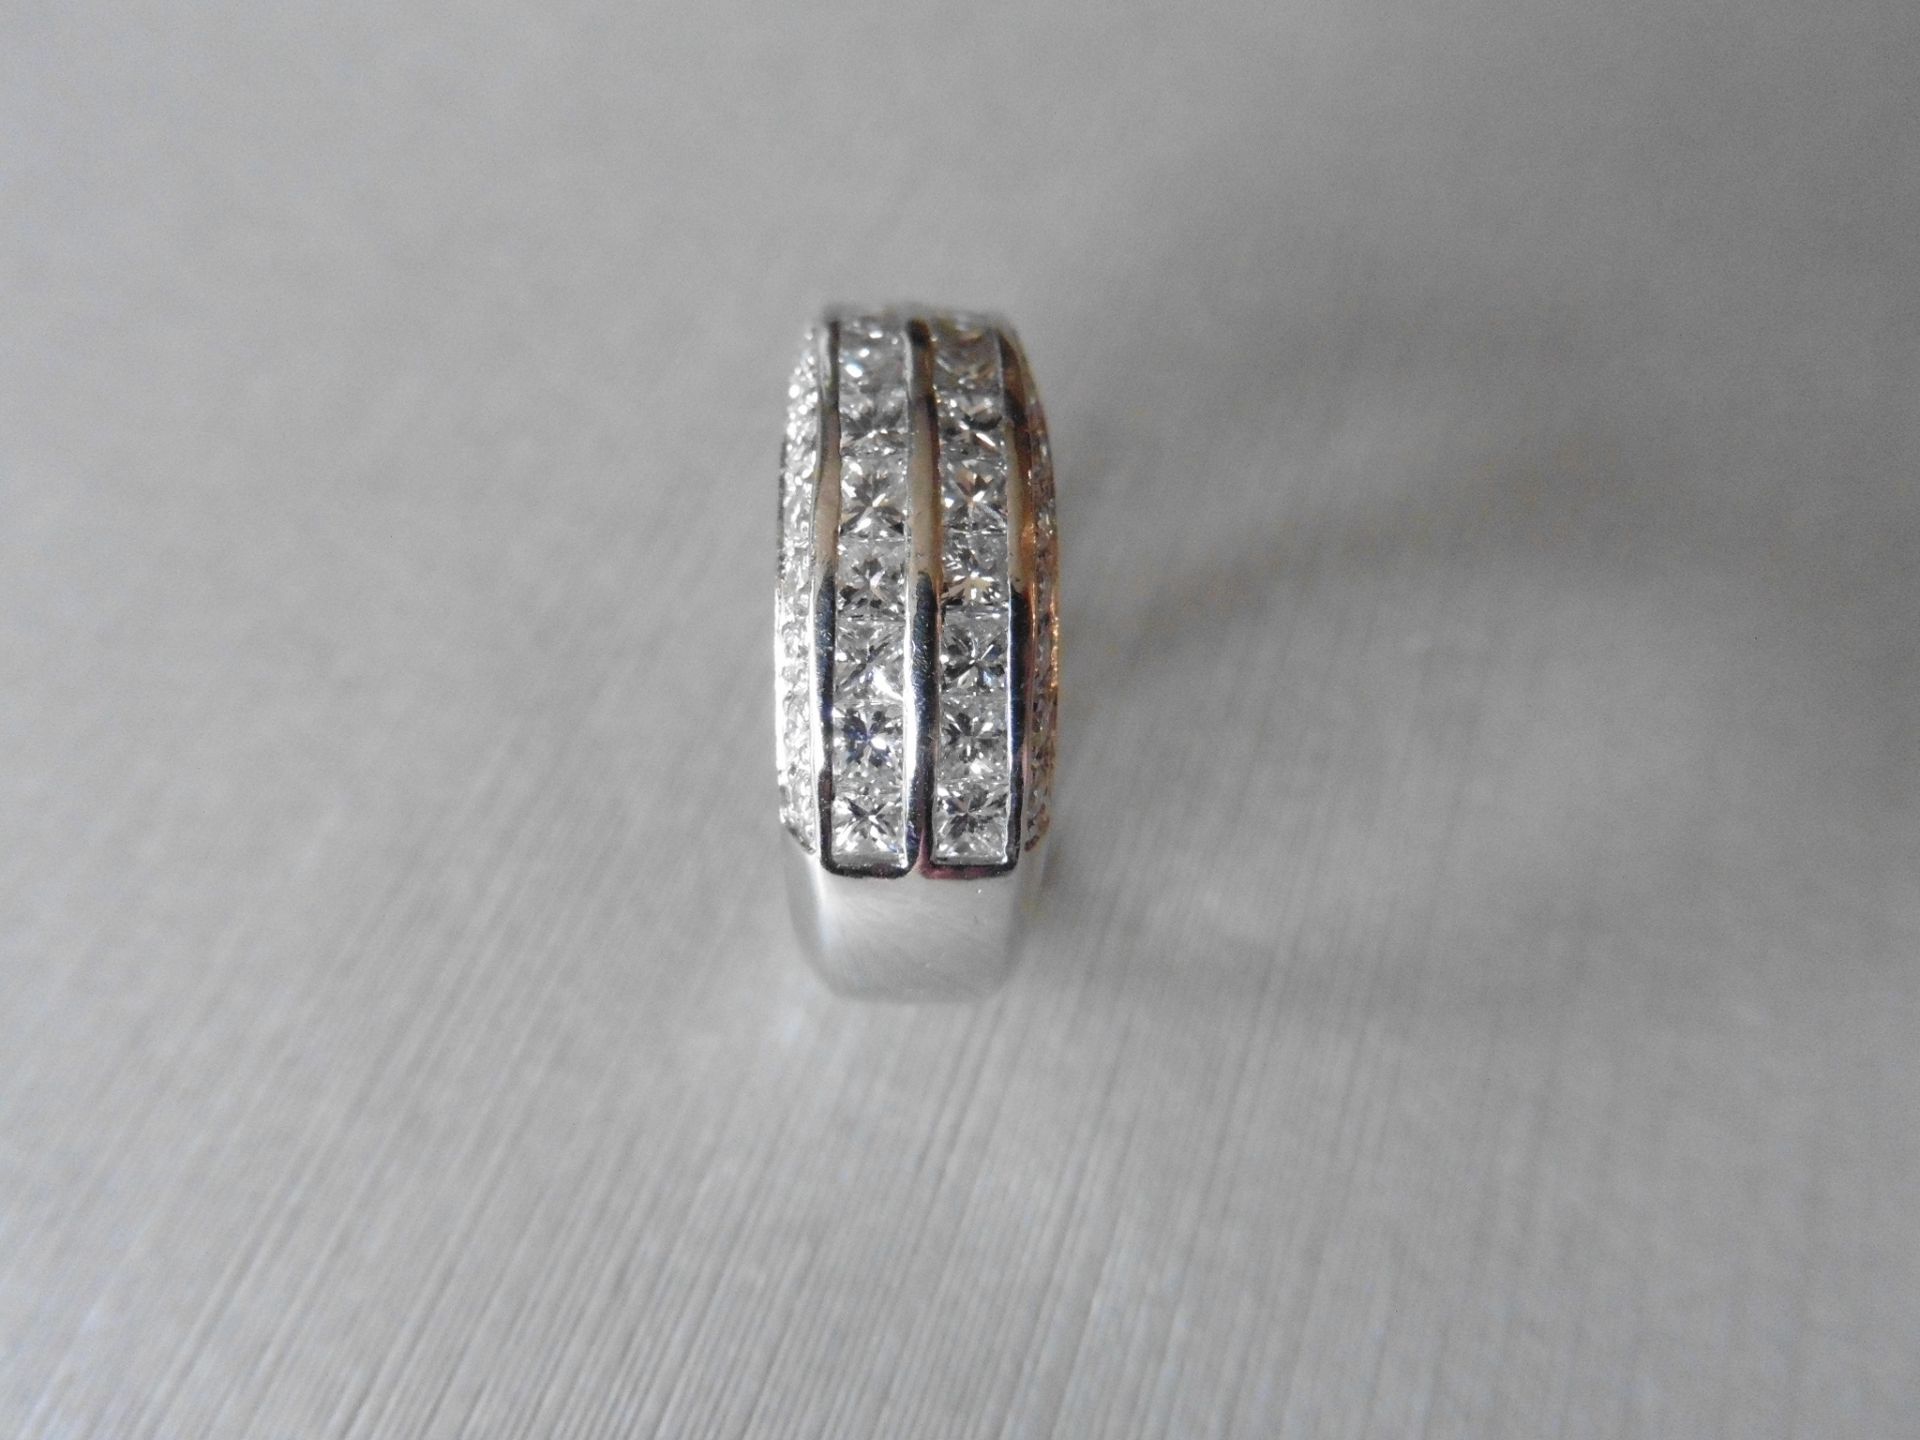 Platinum diamond band ring set with 2 rows of 24 princess cut diamonds, channel setting, H/I colour, - Image 3 of 4